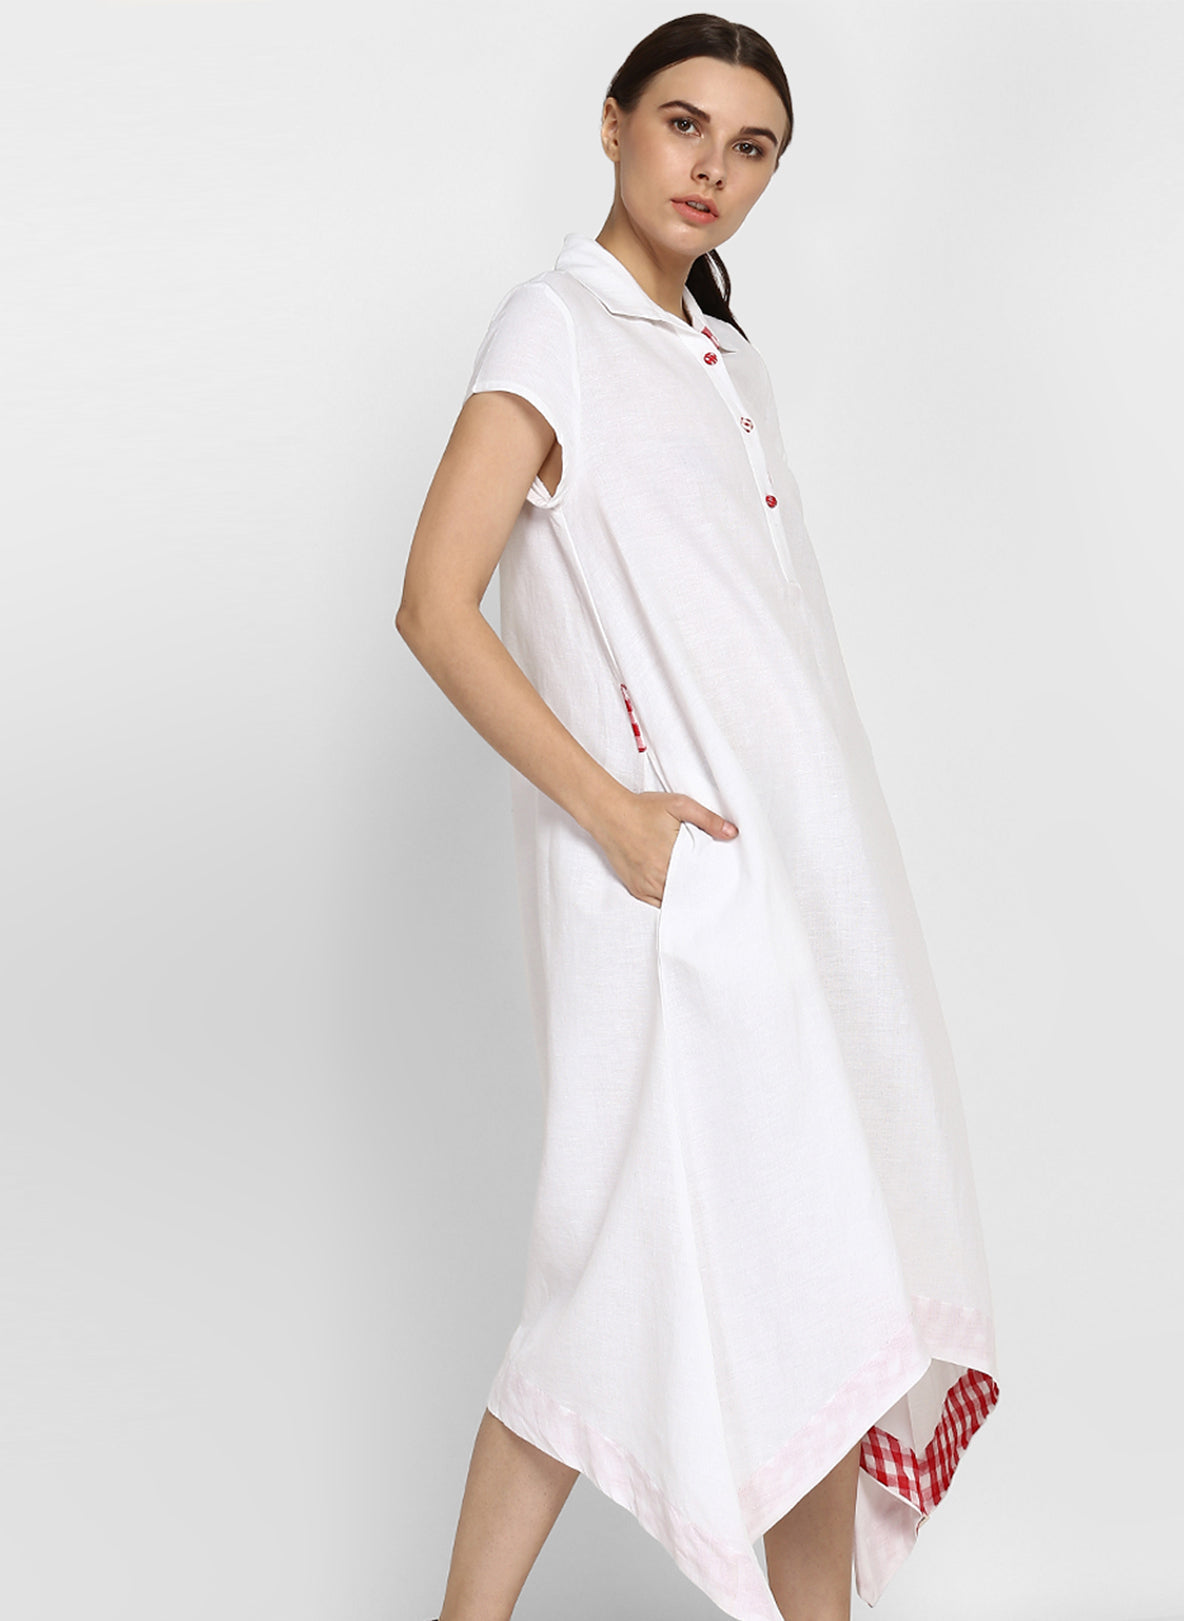 Get Chic White High Low Dress